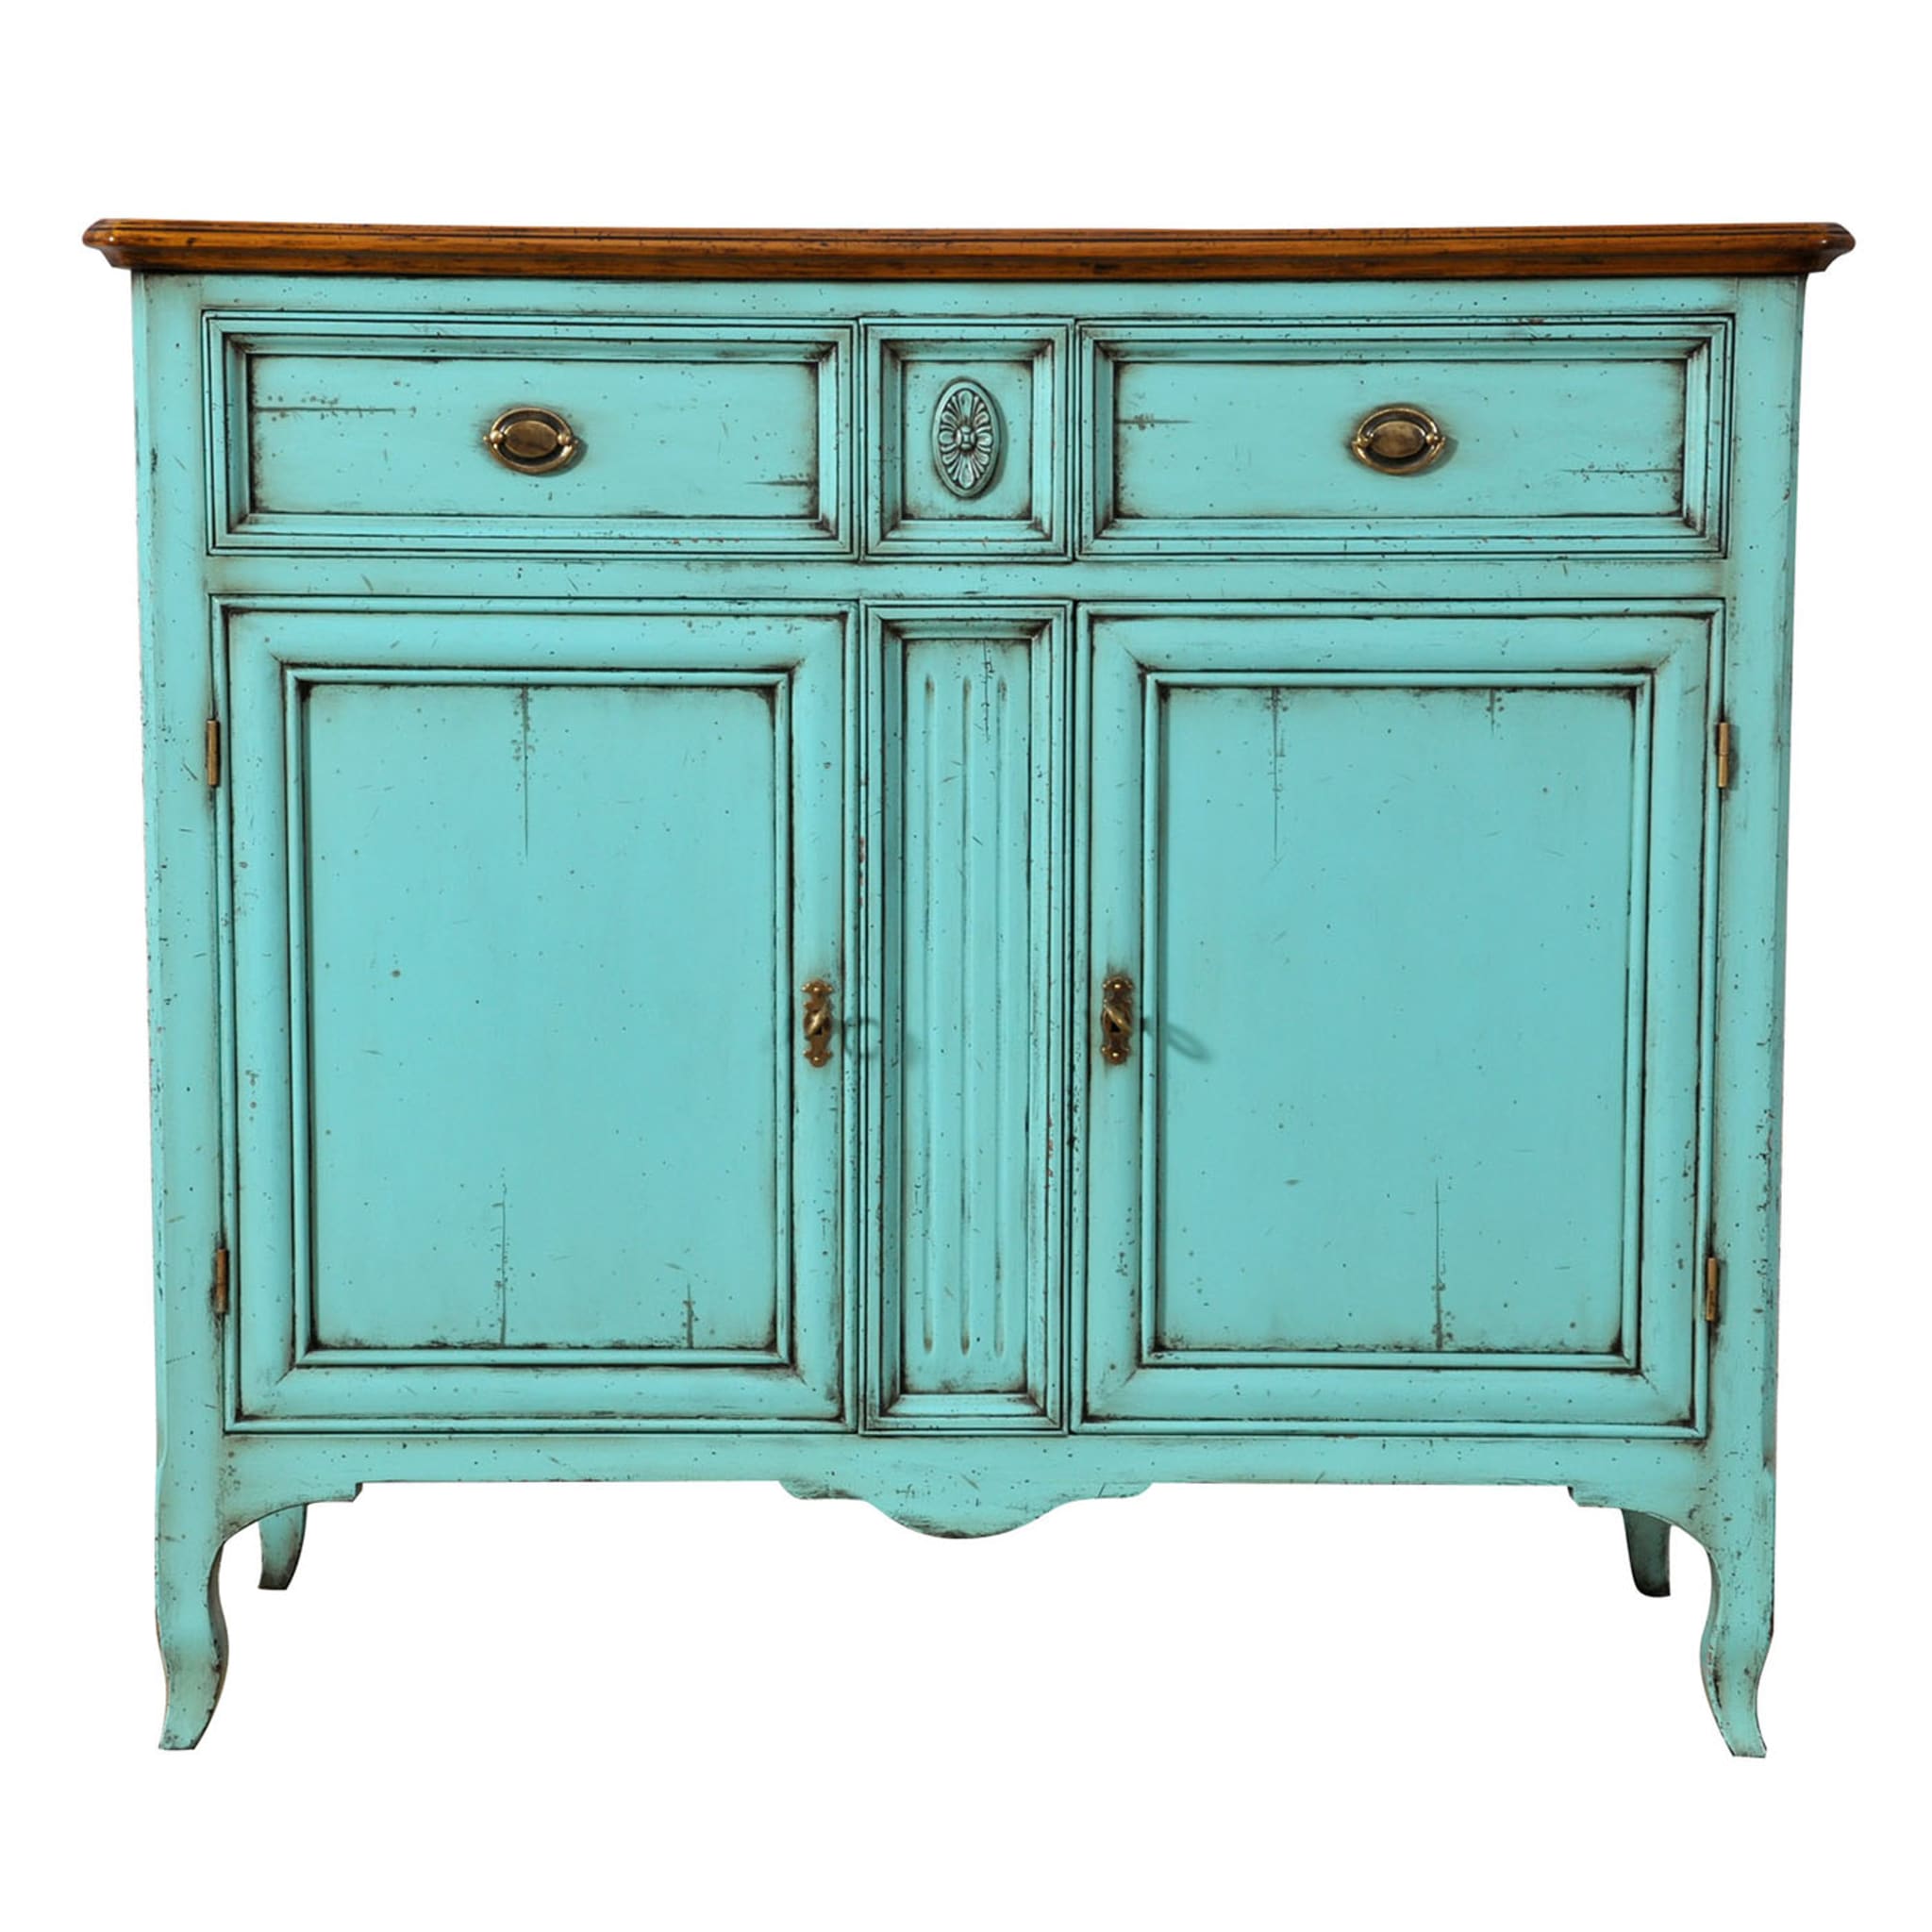 Impero '800 Empire-Style Turquoise Sideboard - Main view